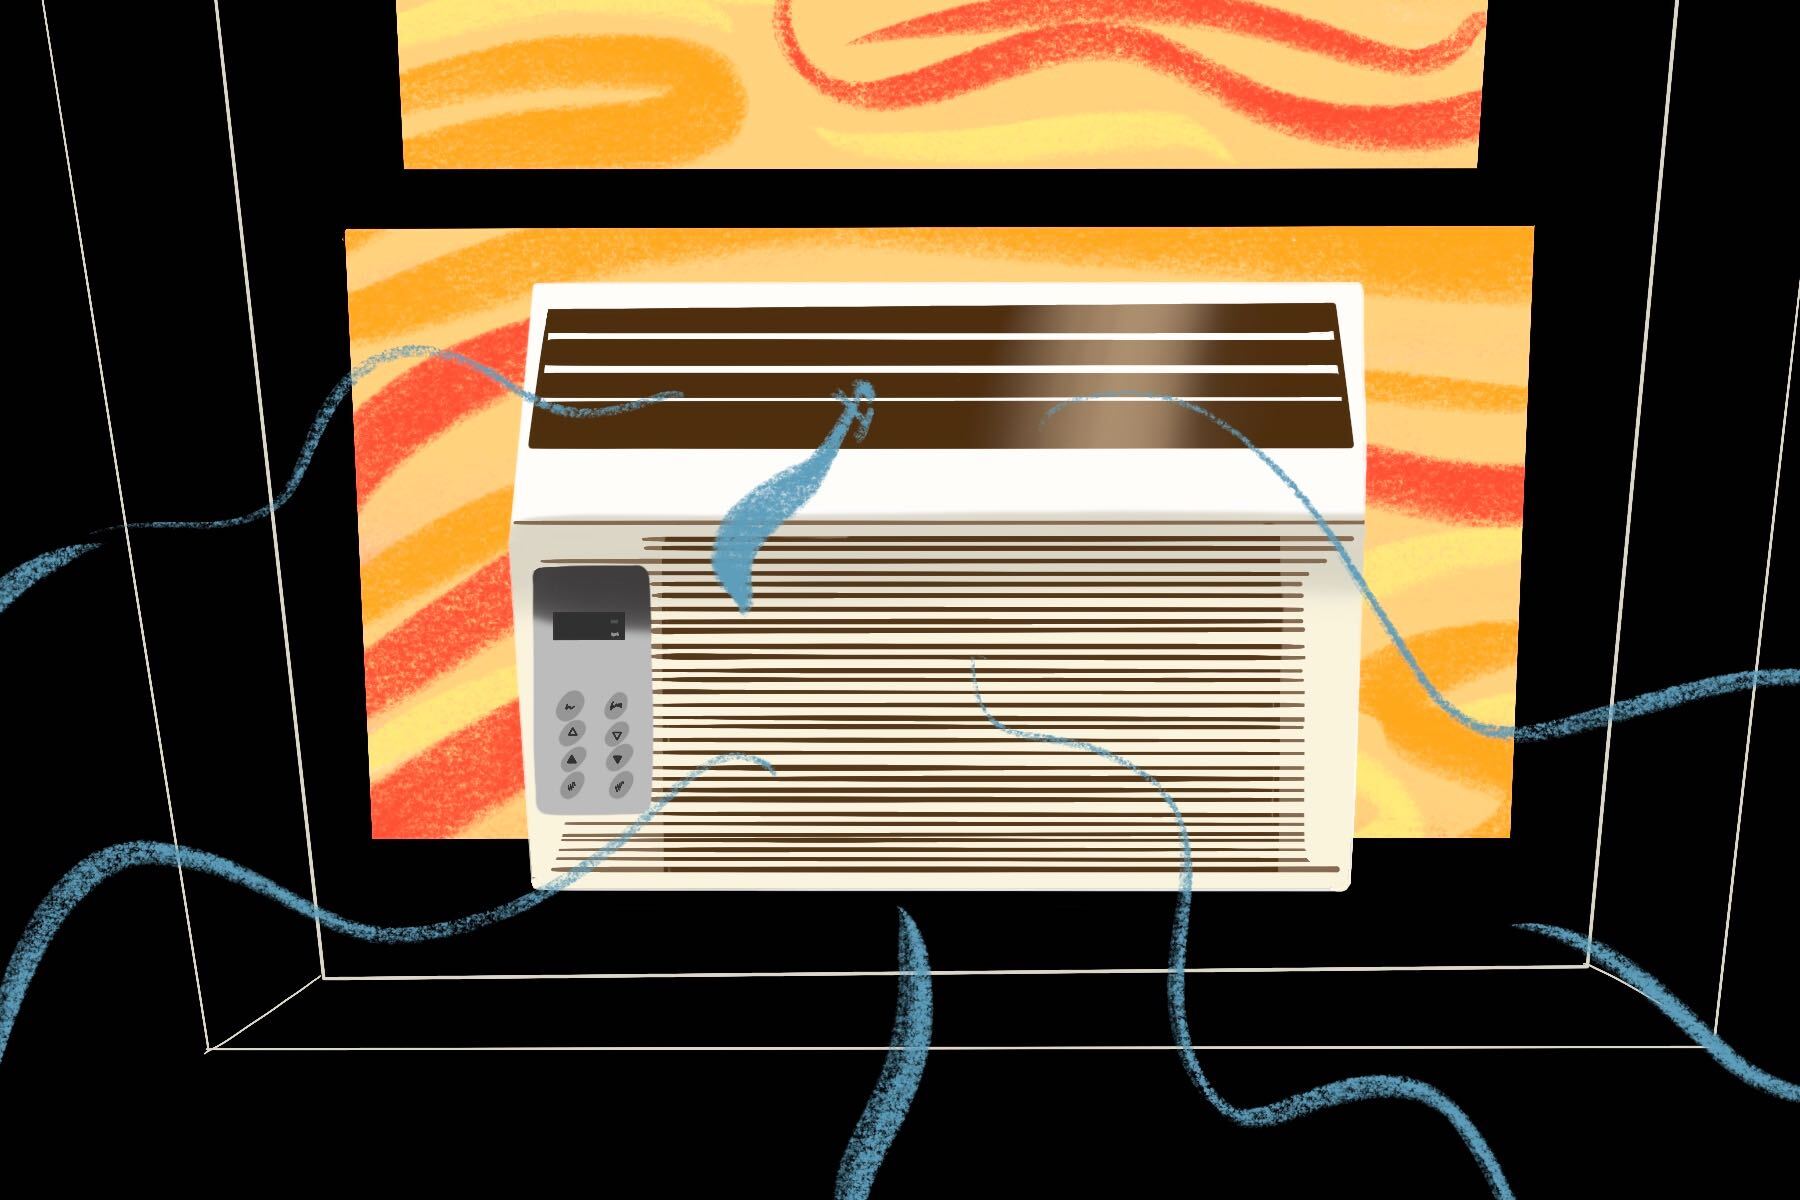 Illustration by Ash Ramirez, Humboldt State University of an air conditioning unit